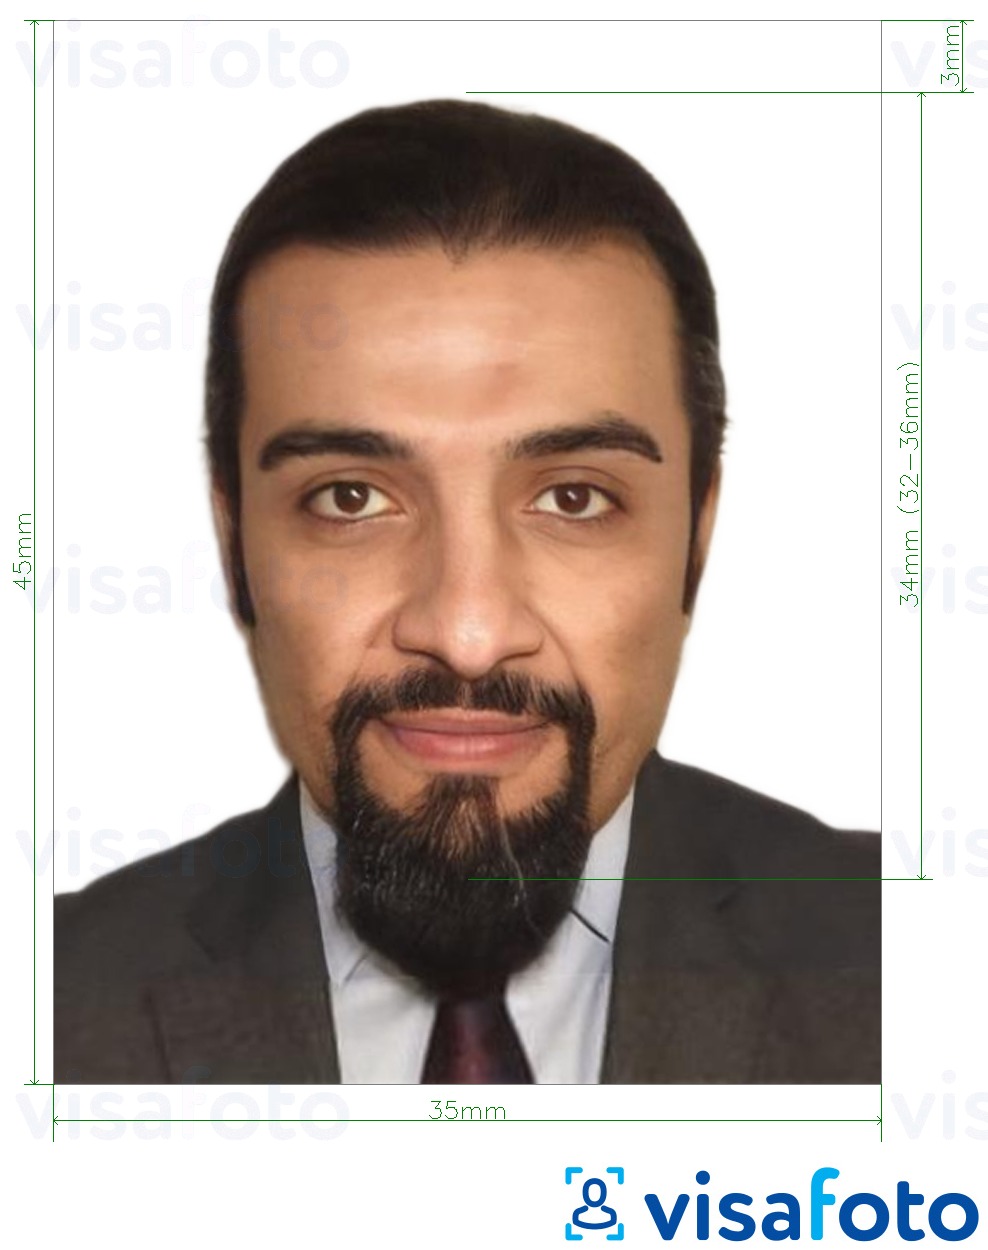 Example of photo for Lebanon visa 3.5x4.5 cm (35x45 mm) with exact size specification